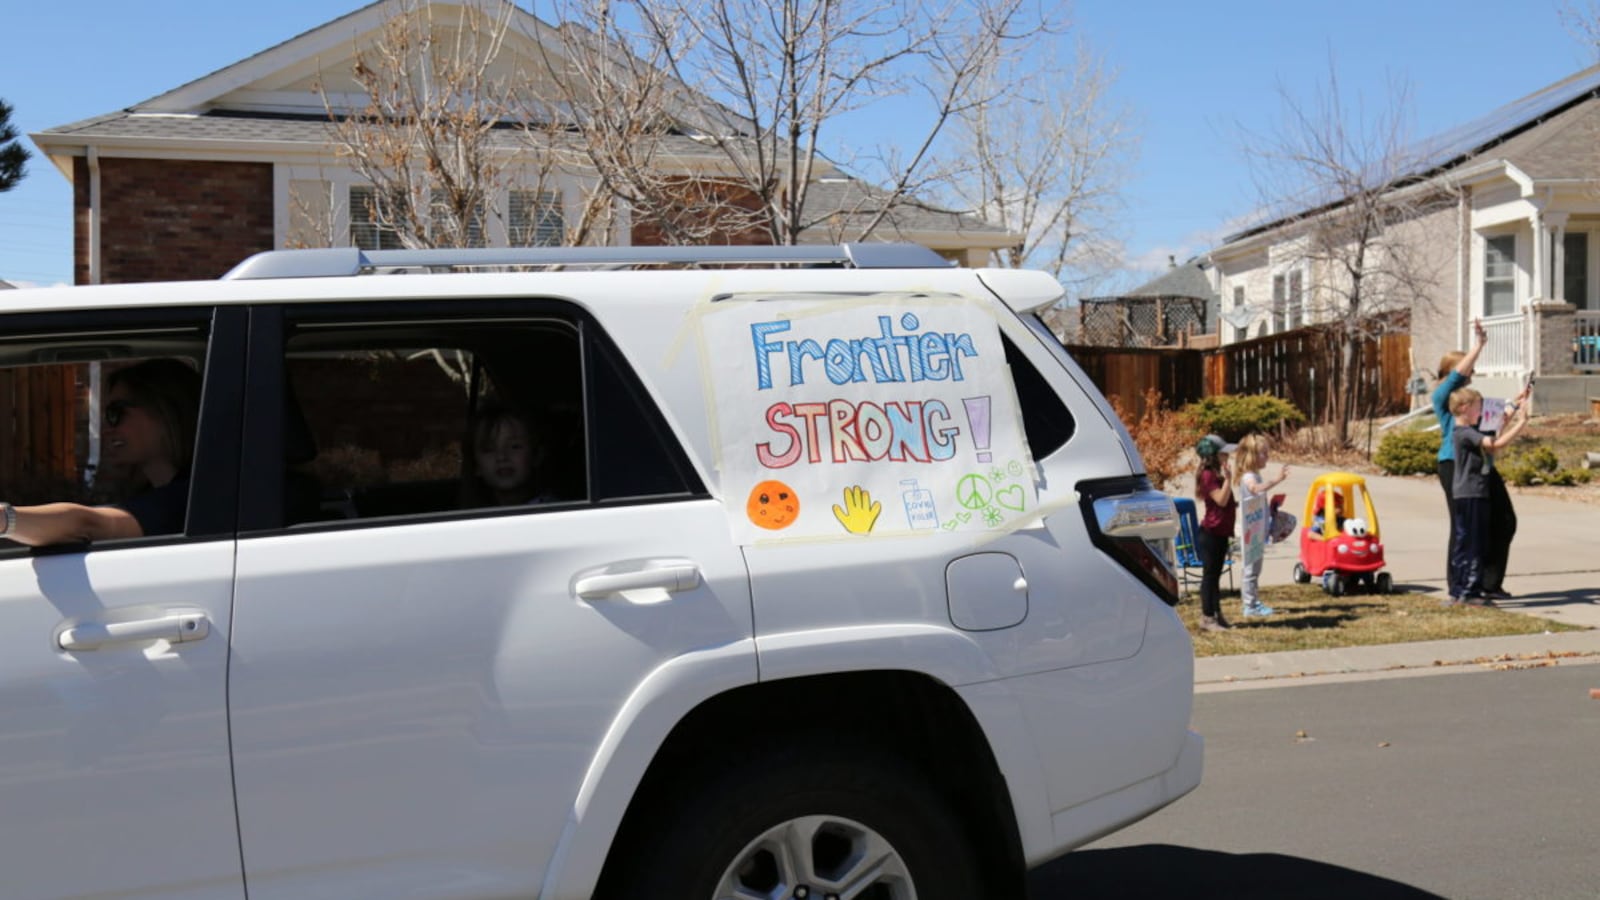 Aurora Frontier P-8 teachers went on a parade route Tuesday March 24, 2020, through their school boundaries to wave to students.